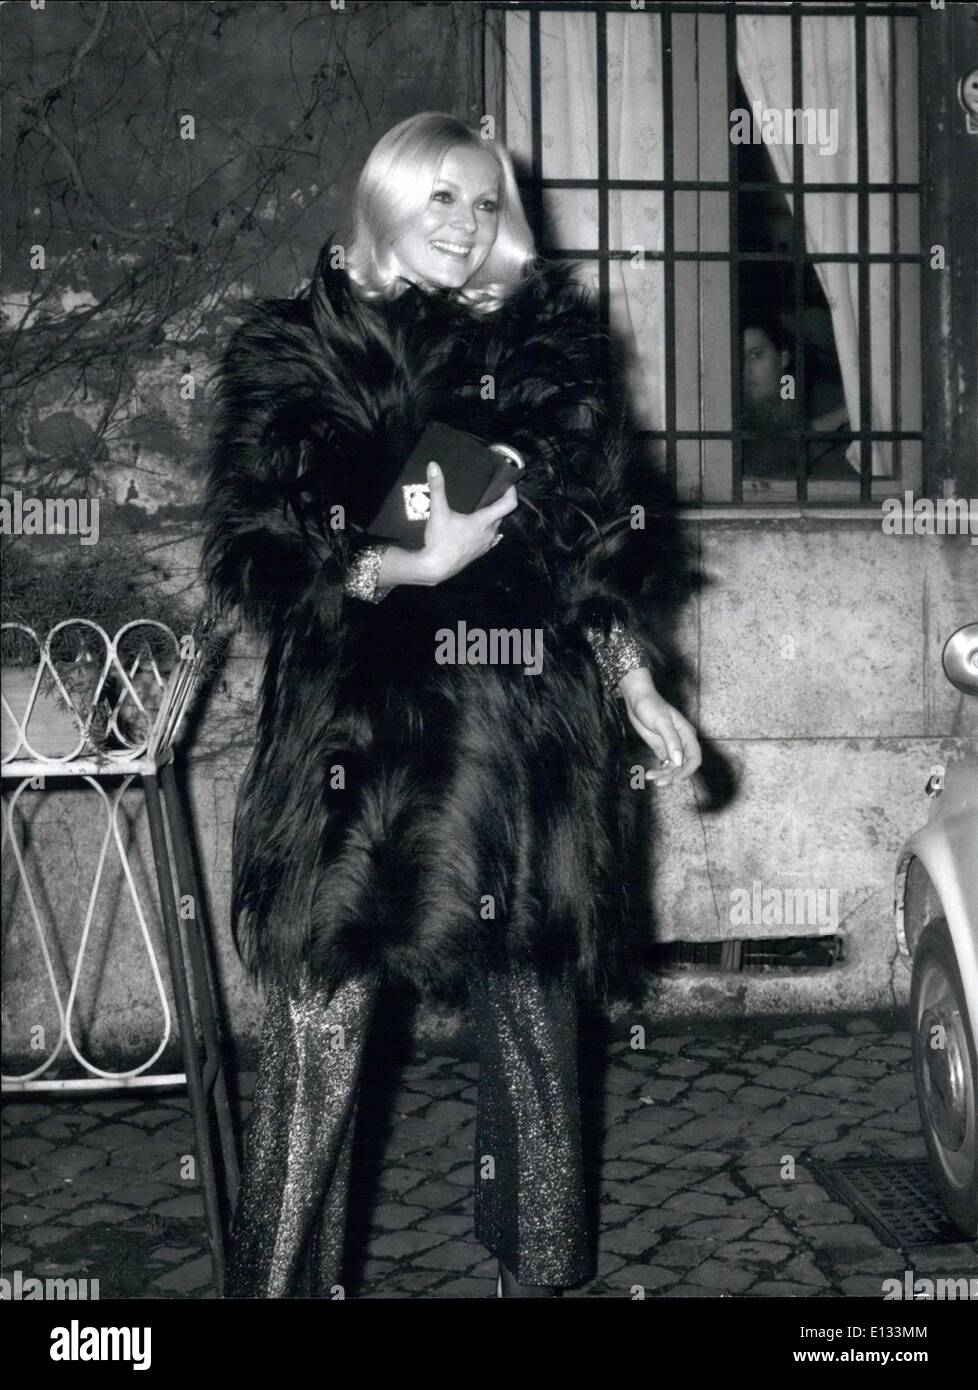 Feb. 26, 2012 - Great party offered by the well-know press agent Enrico Lucherini, at the occasion of 10th anniversary of his activity on the world of the screen. Photo shows charming blonde actress Virna Lisi. Stock Photo